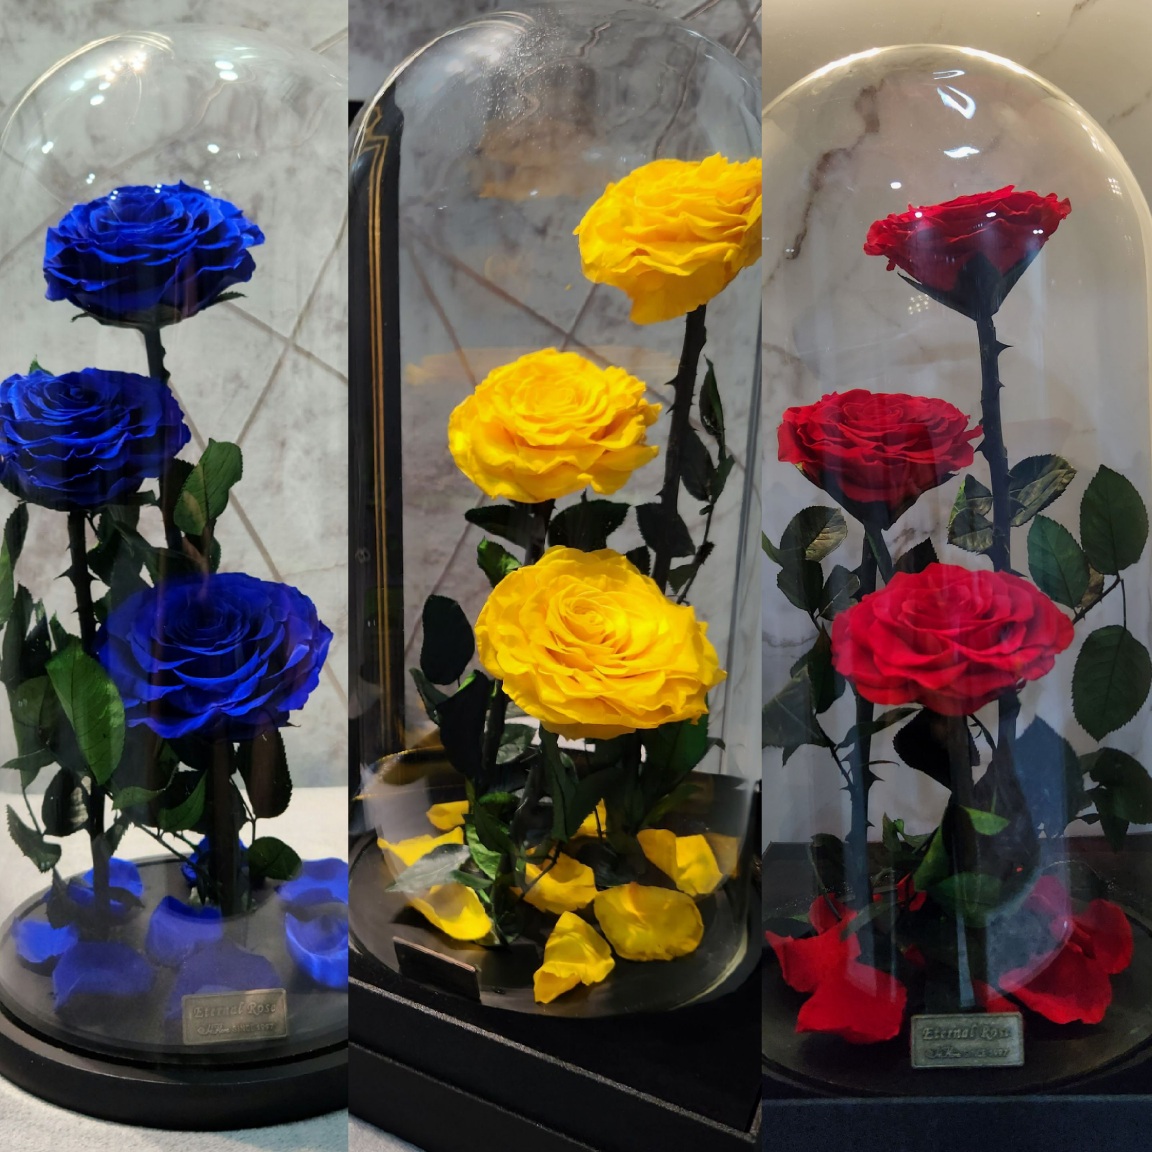 Preserved Roses I 3 Roses in a Glass Dome I Gifts for her I Forever Eternal Roses - BAS Kuwait